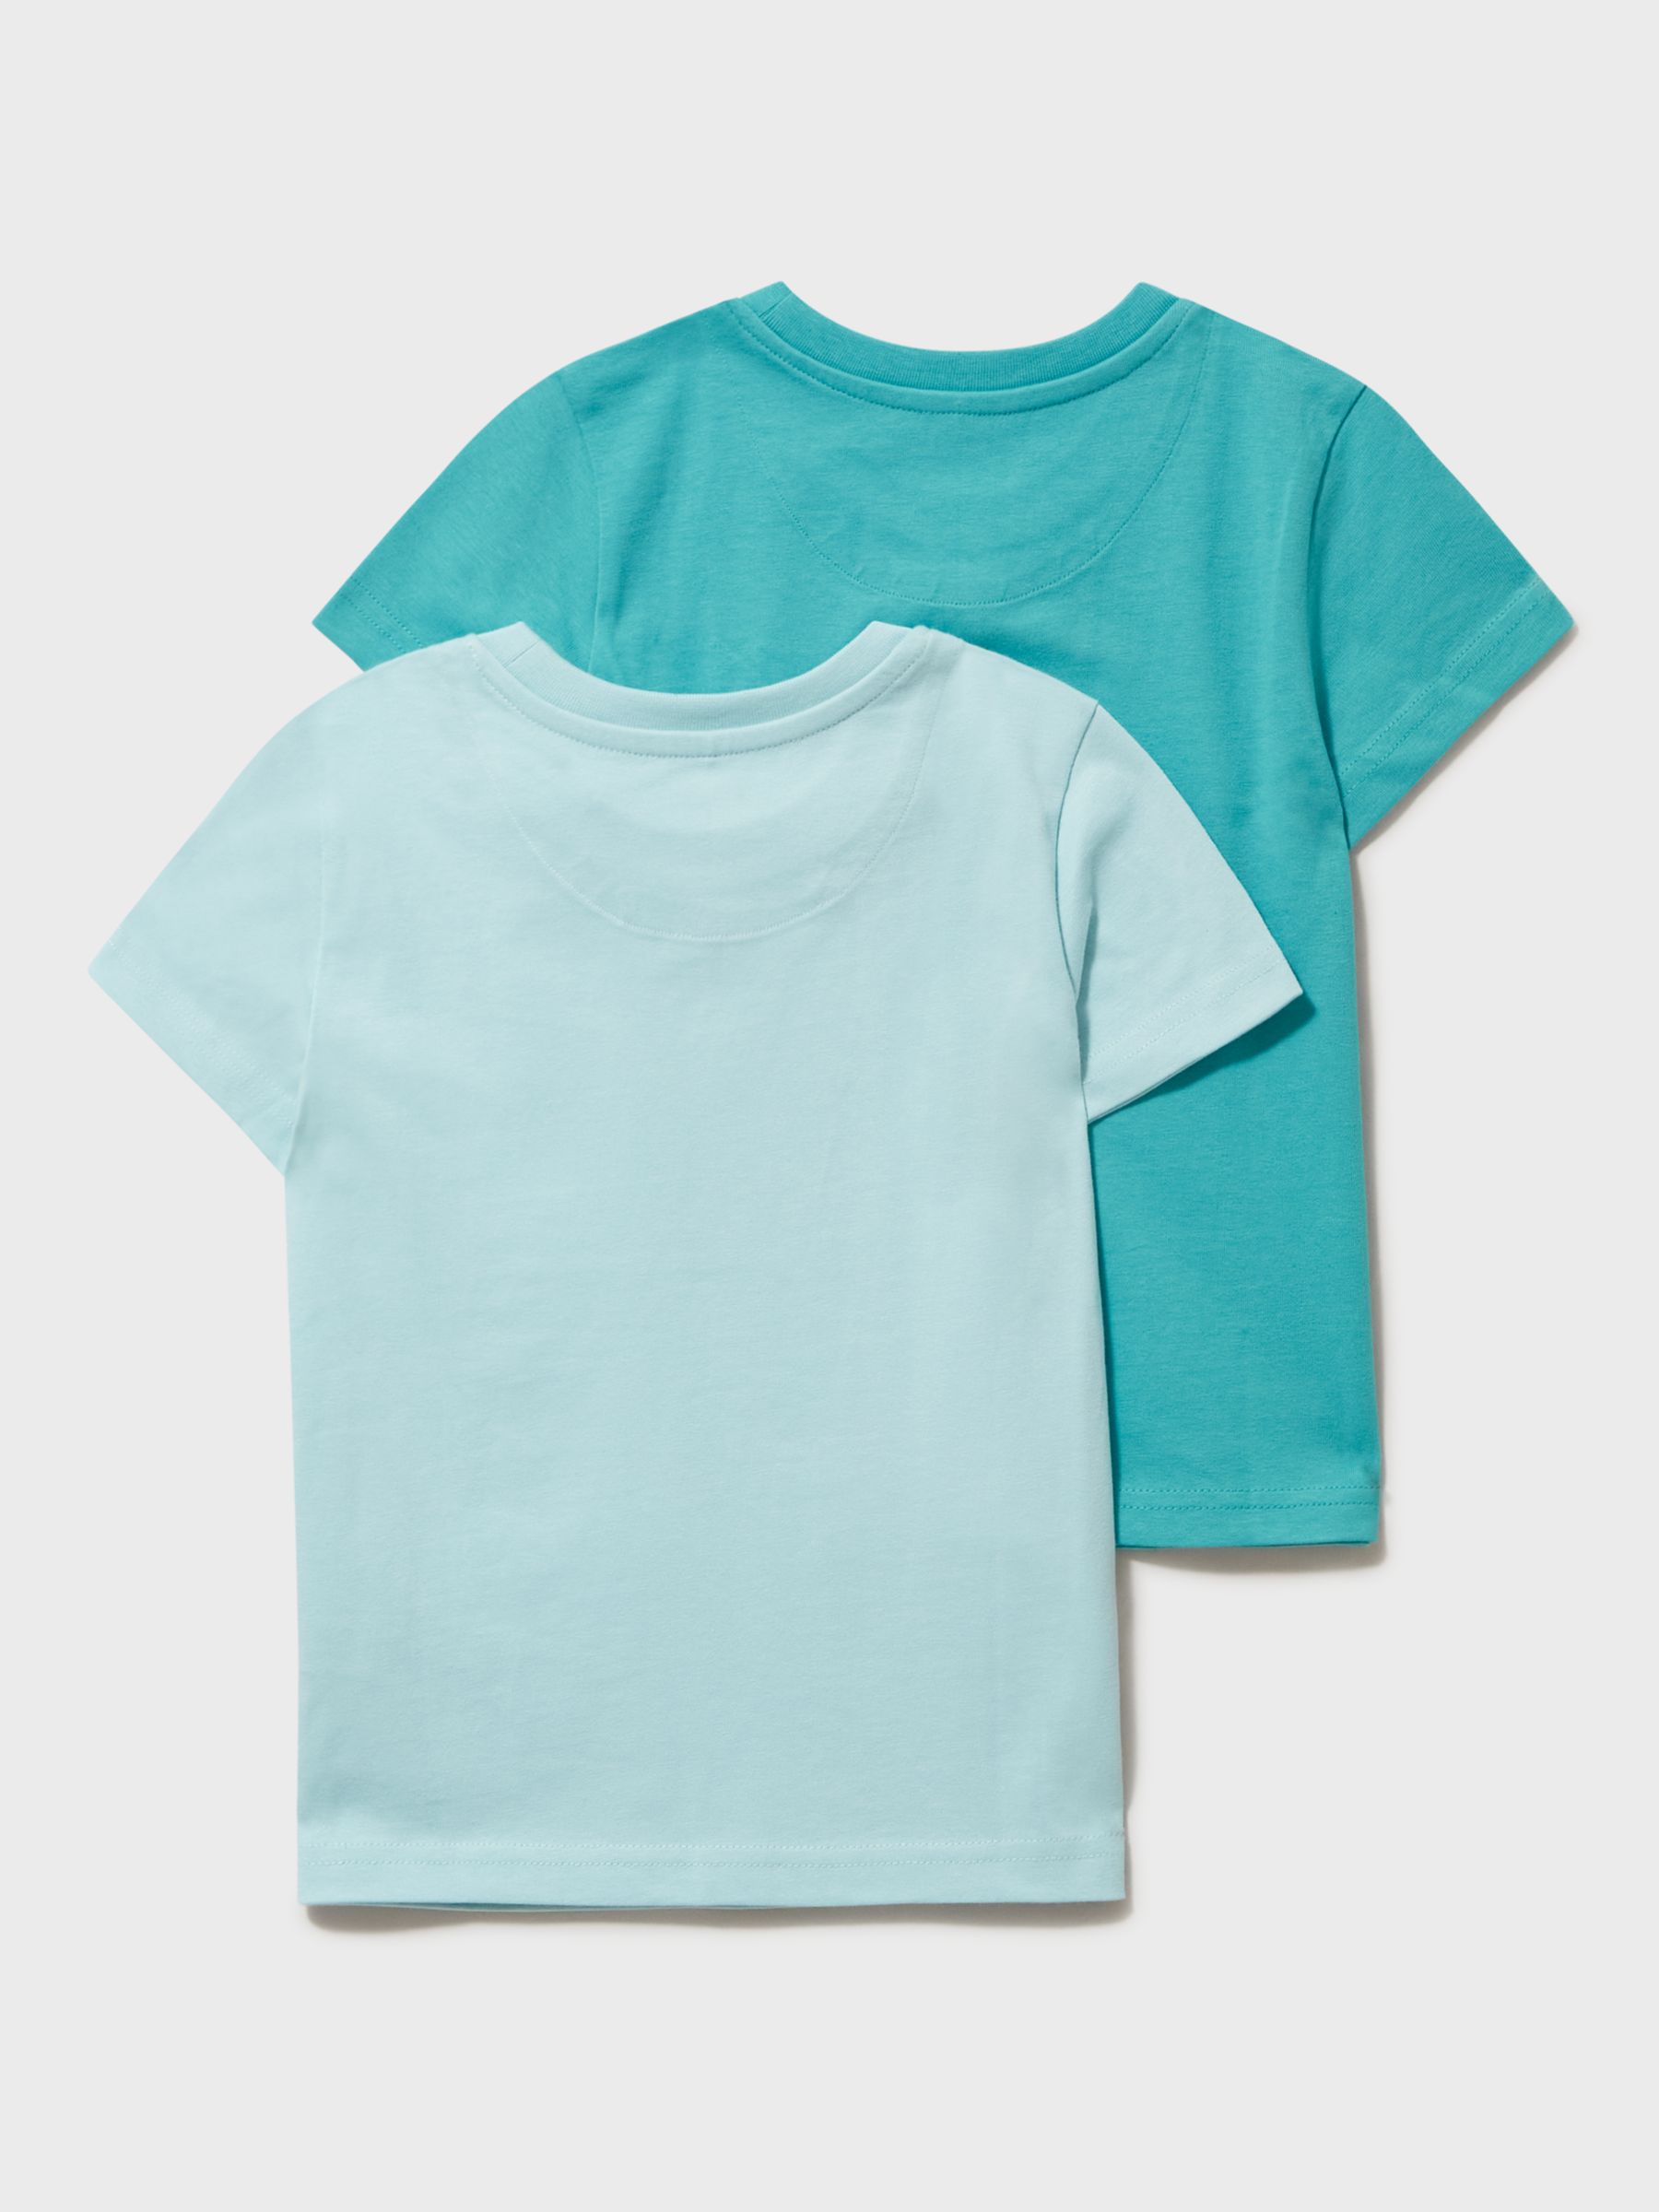 Buy Crew Clothing Kids' Classic Short Sleeve T-Shirt, Pack of 2 Online at johnlewis.com